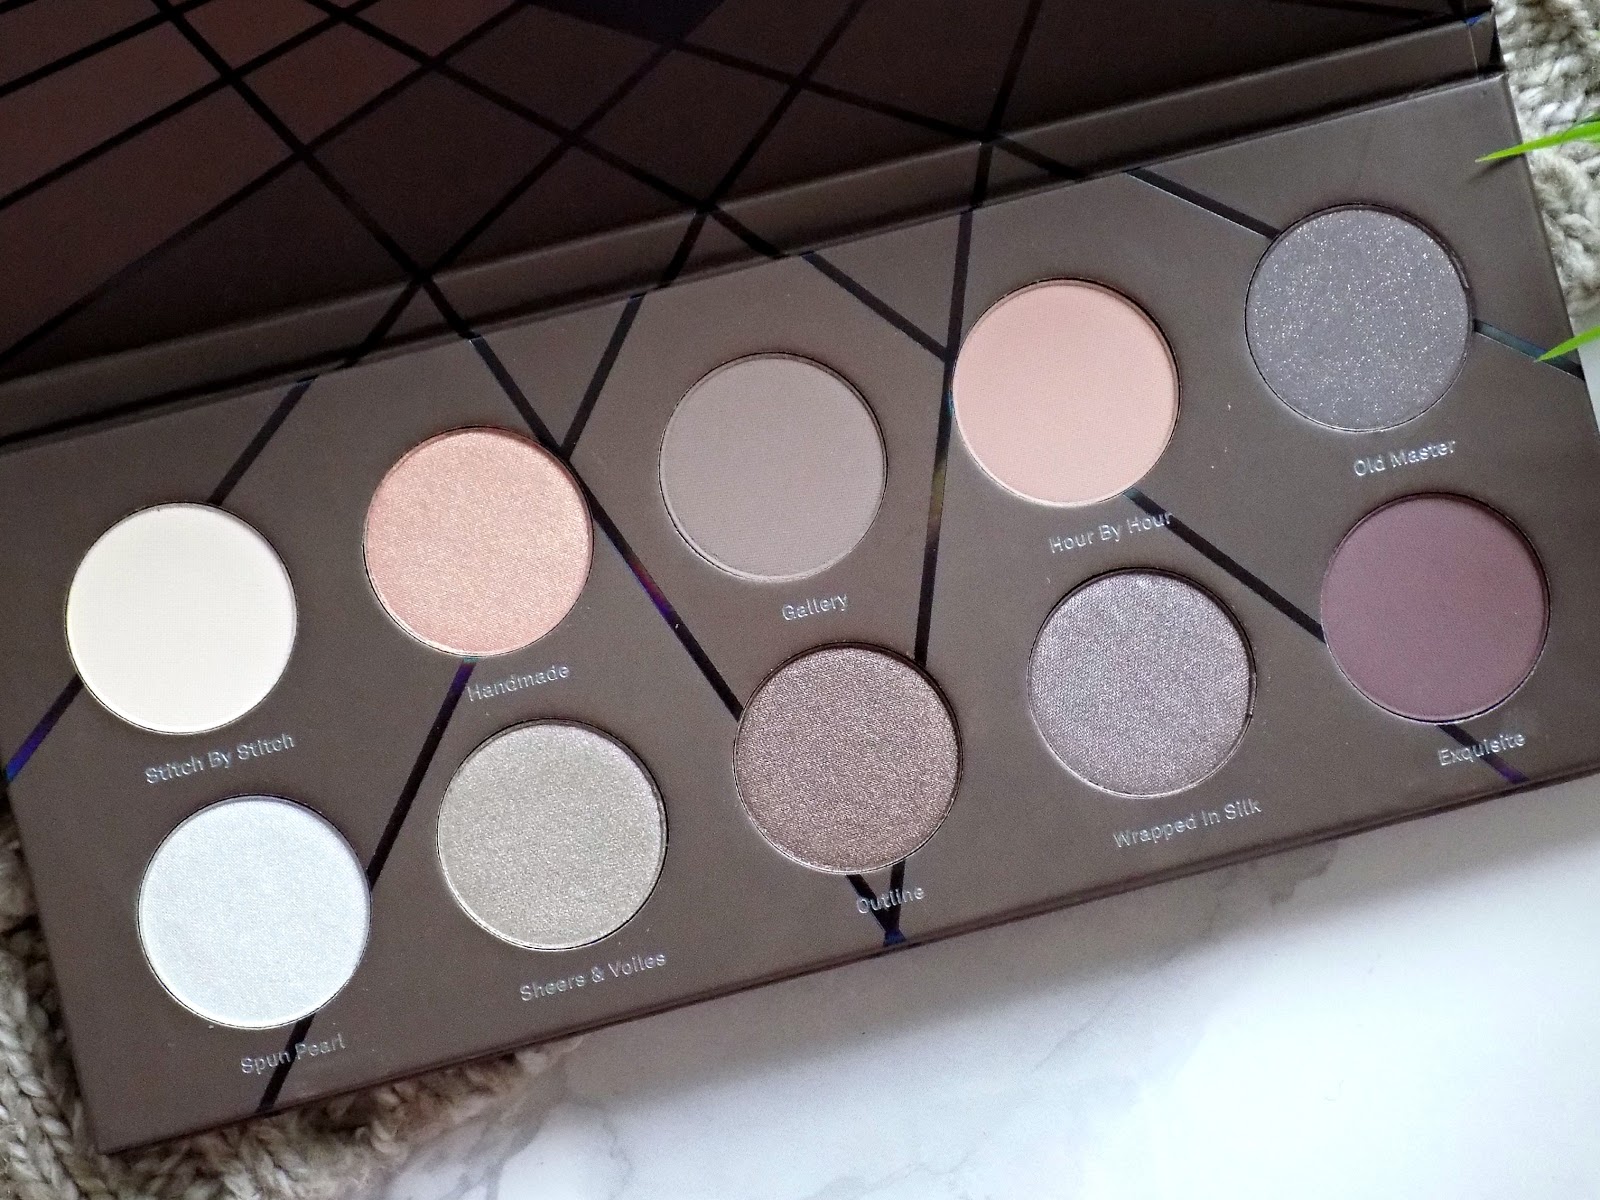 Zoeva 'En Taupe' palette - review and swatches | Mummy's ...